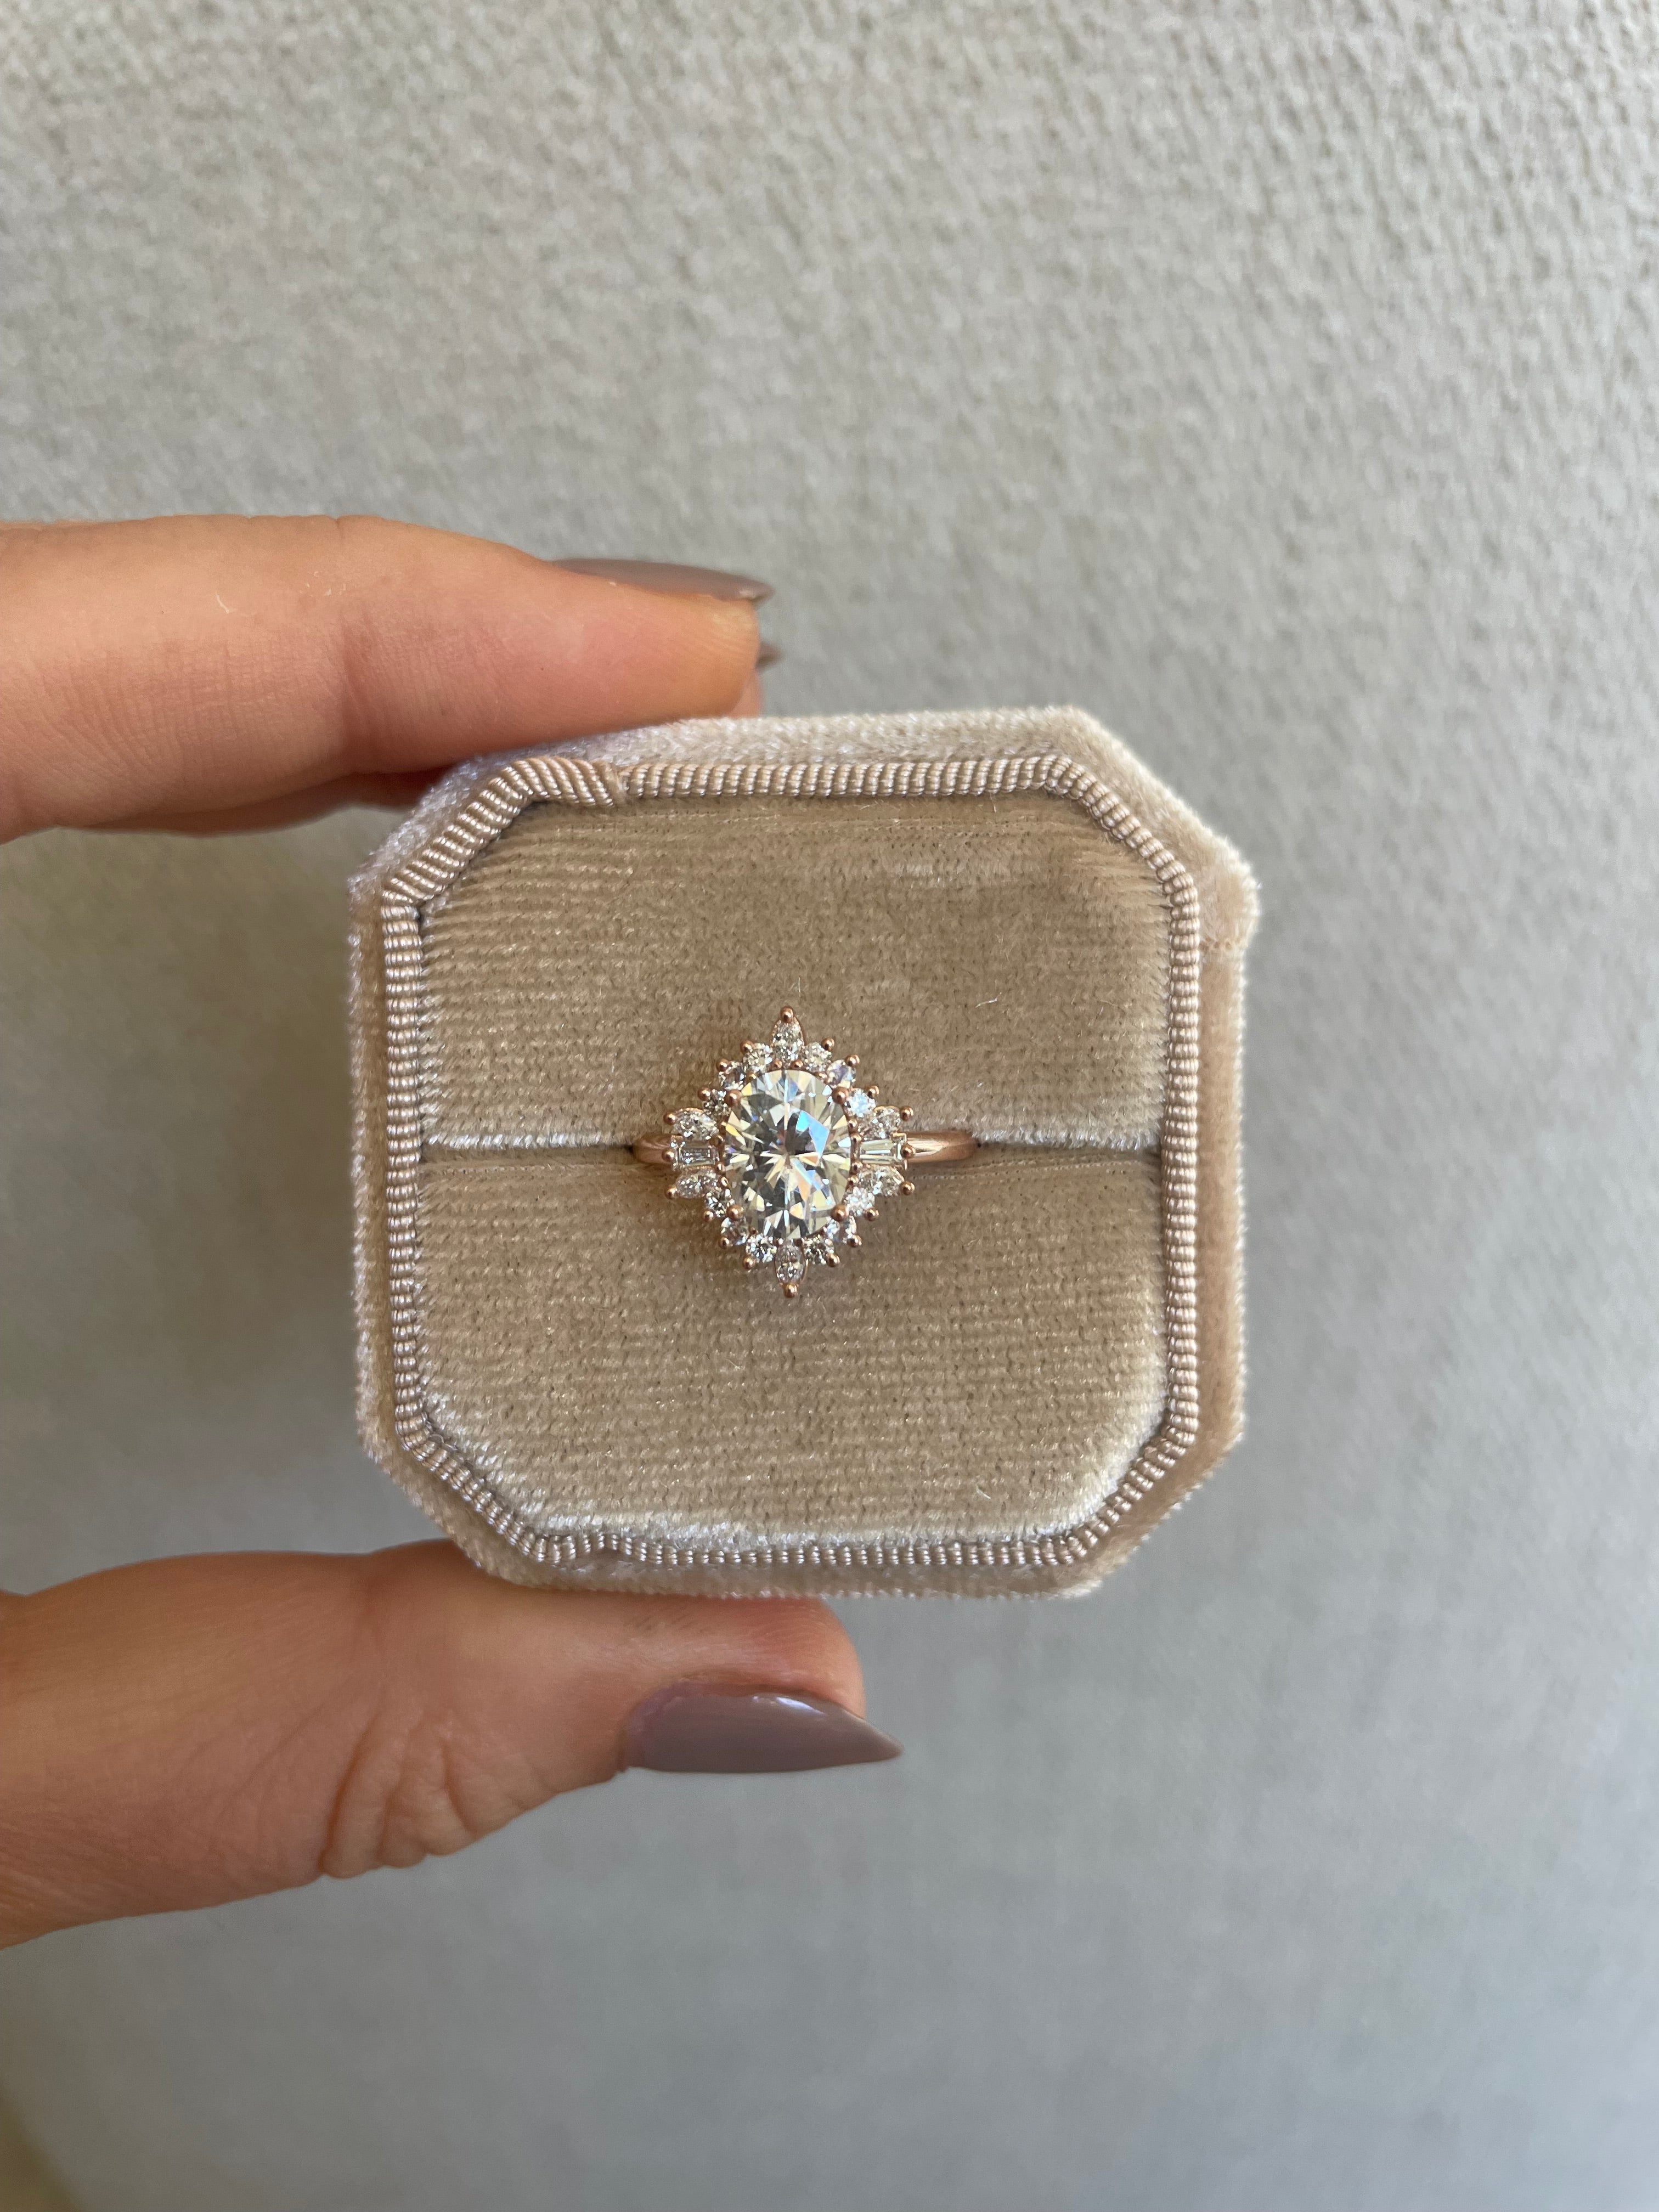 Unique Vintage Inspired Engagement Ring. Carter Eve Jewelry Engagement Ring.